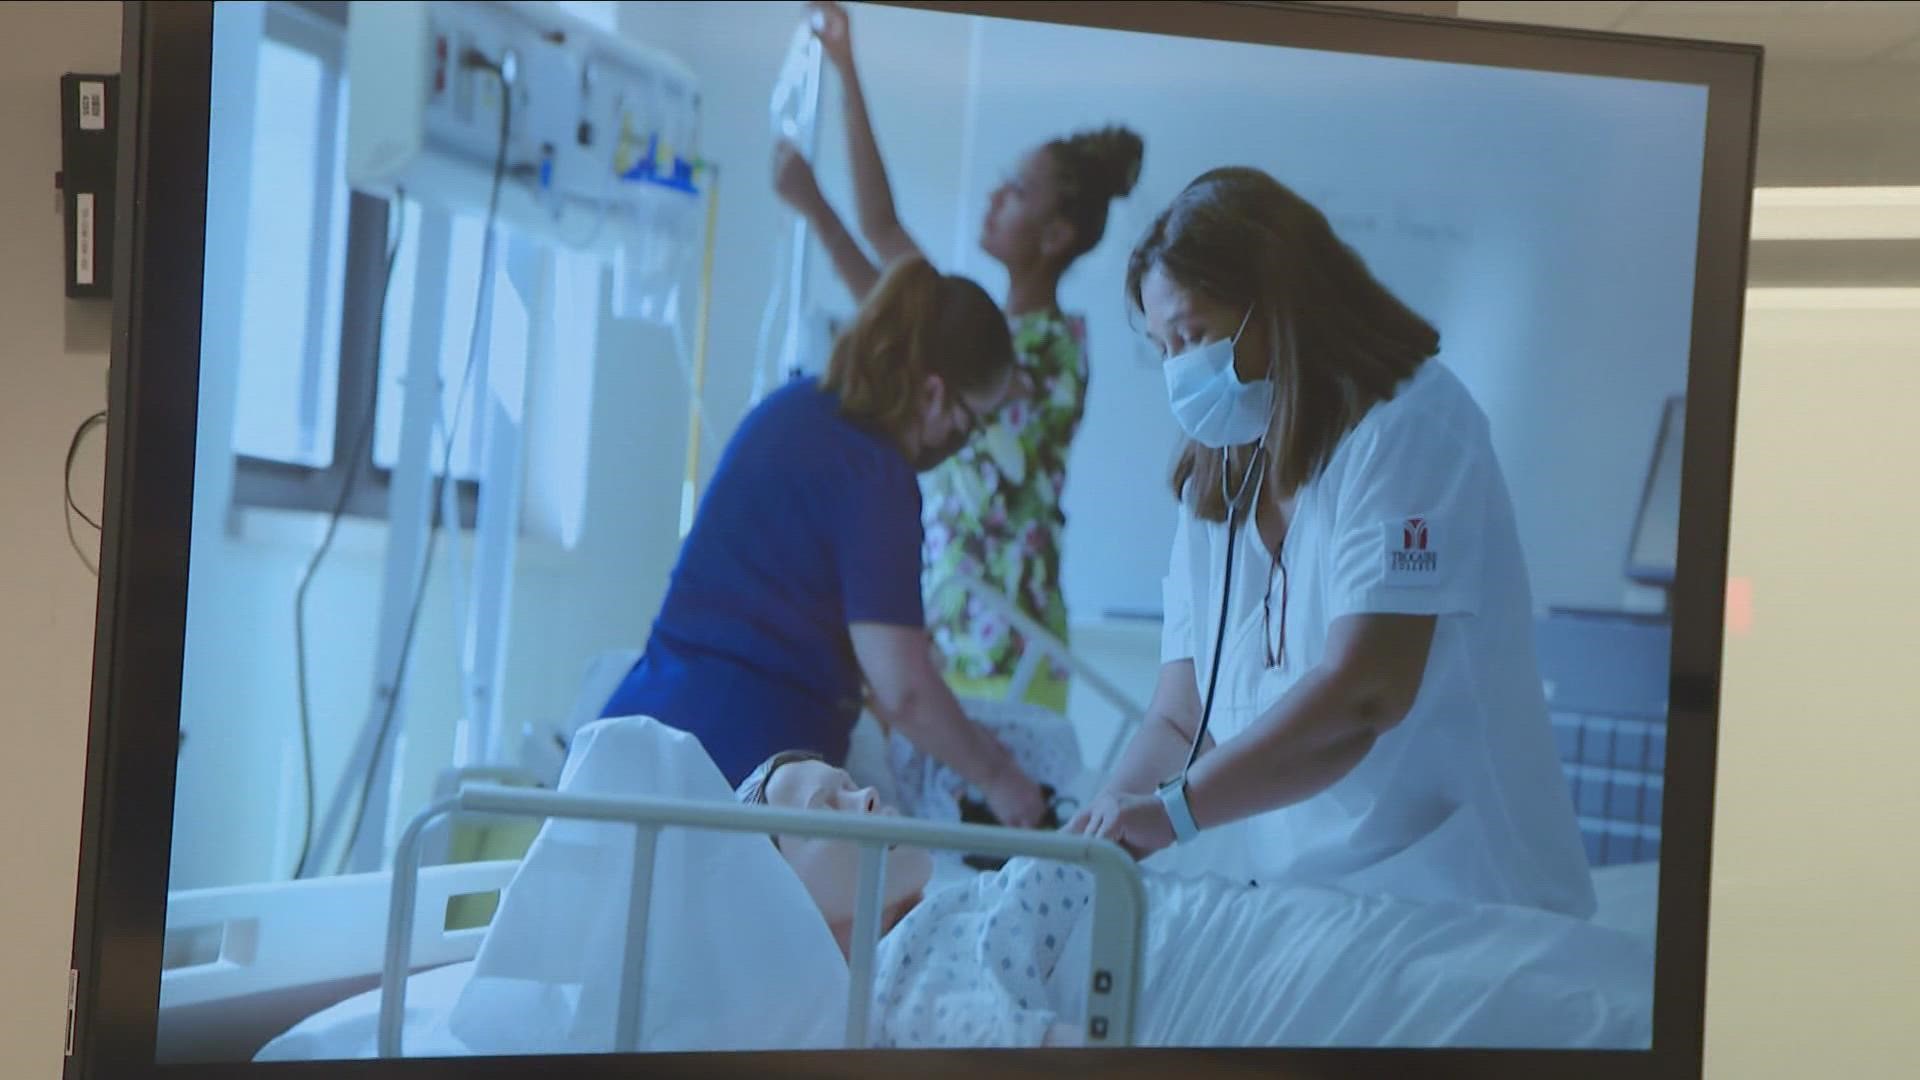 it's giving those nursing students a chance to learn more and experience real life scenarios.